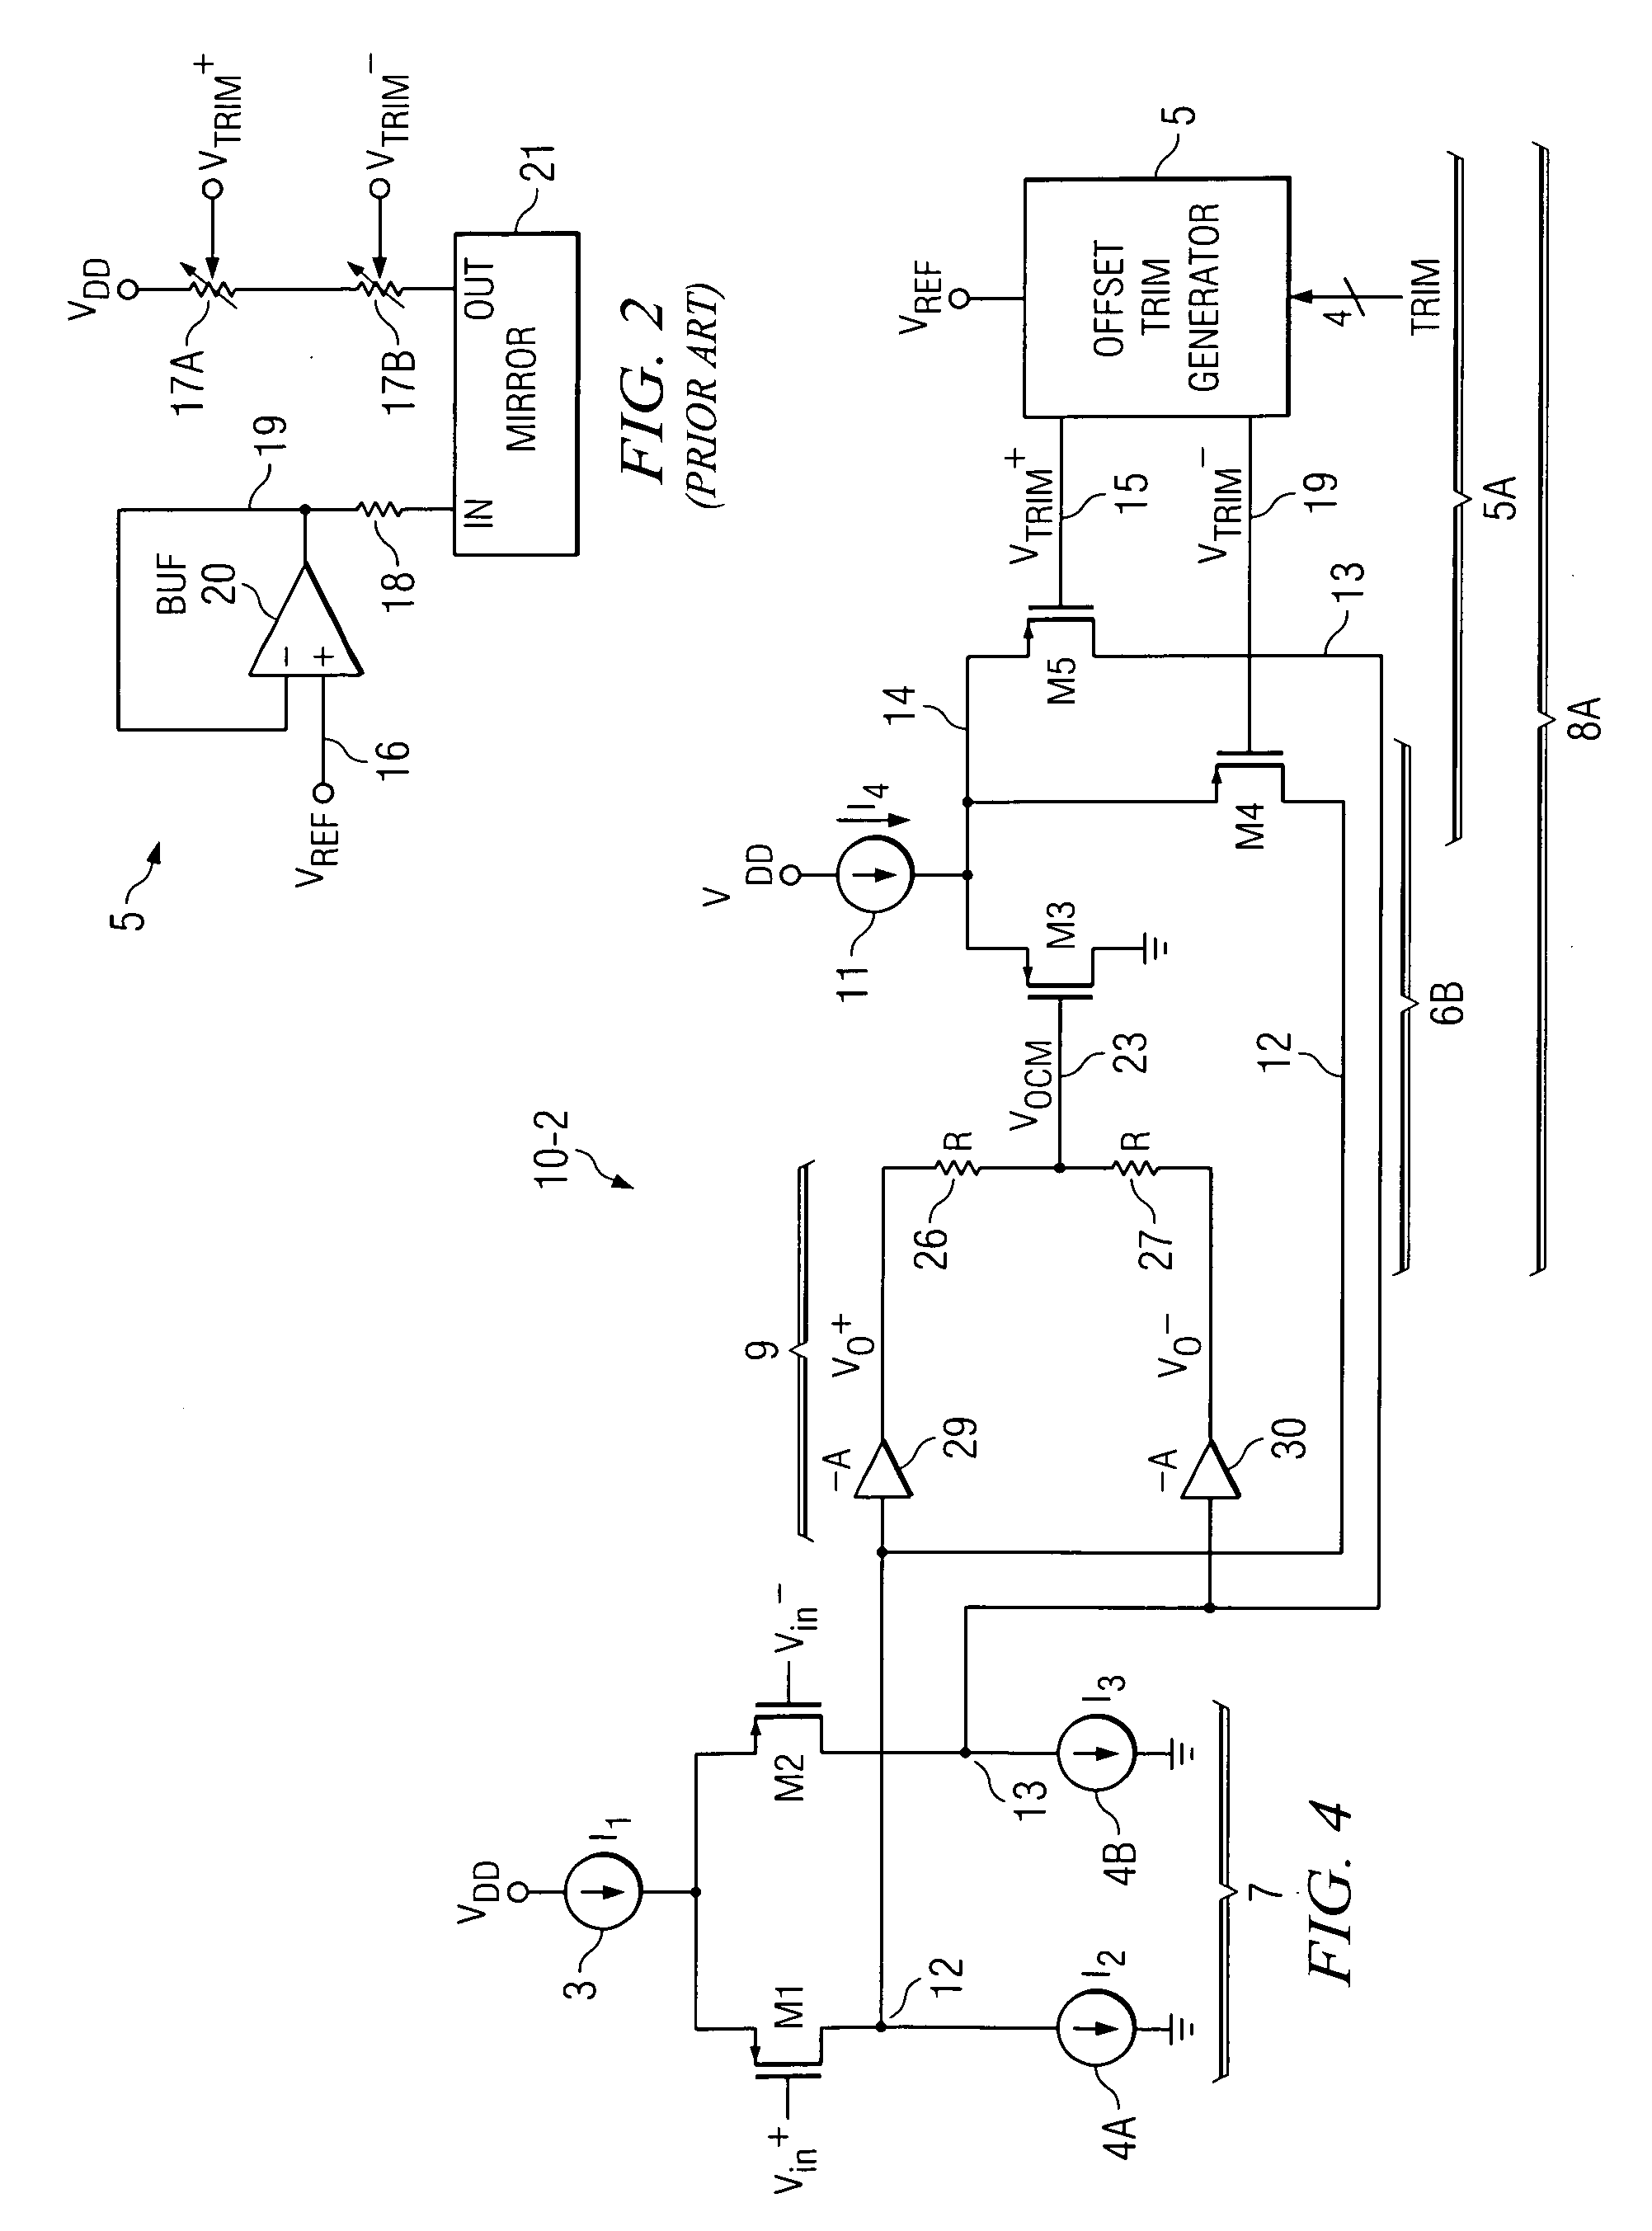 Combination trim and CMFB circuit and method for differential amplifiers